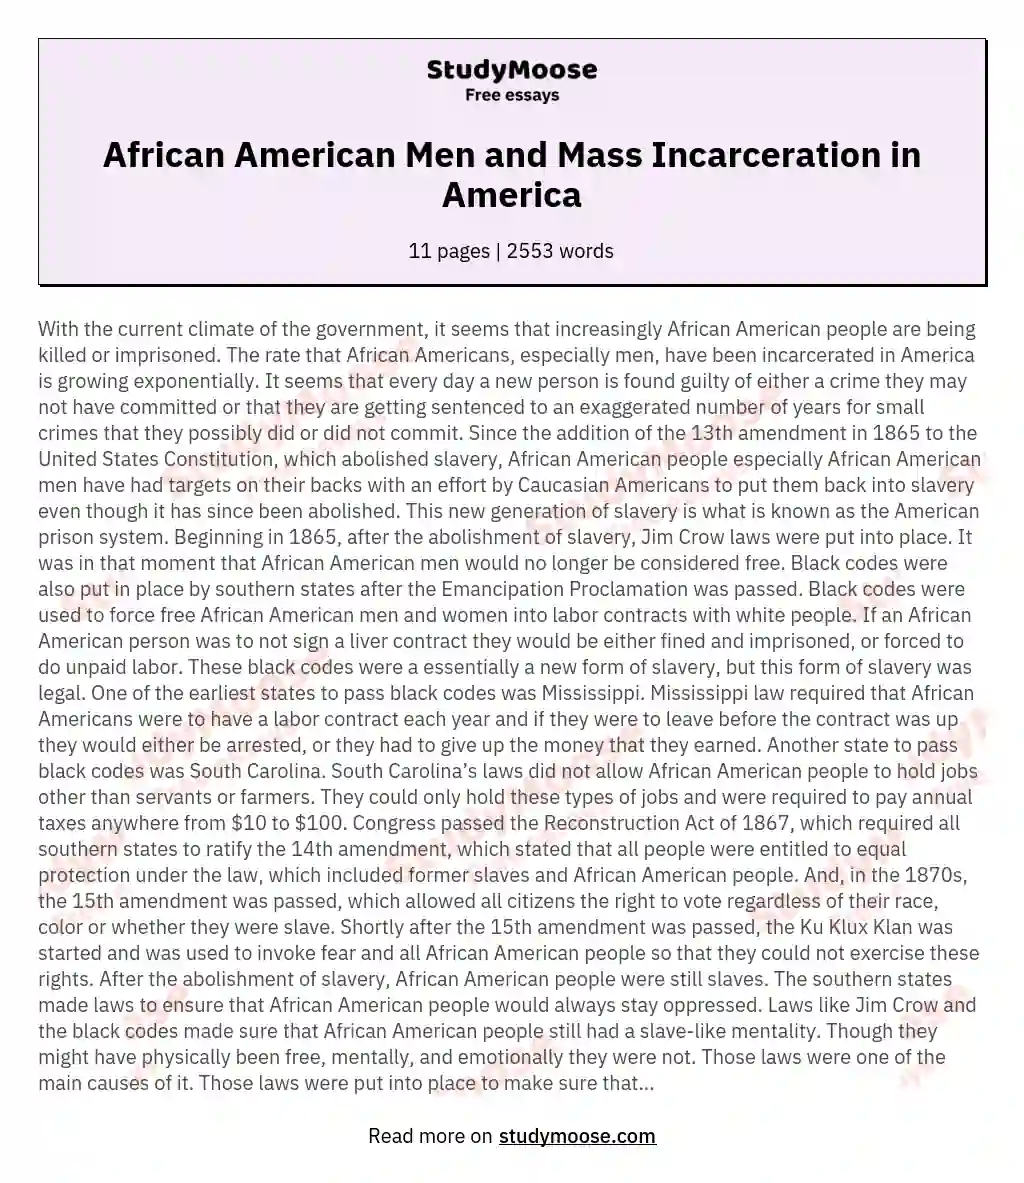 African American Men and Mass Incarceration in America essay